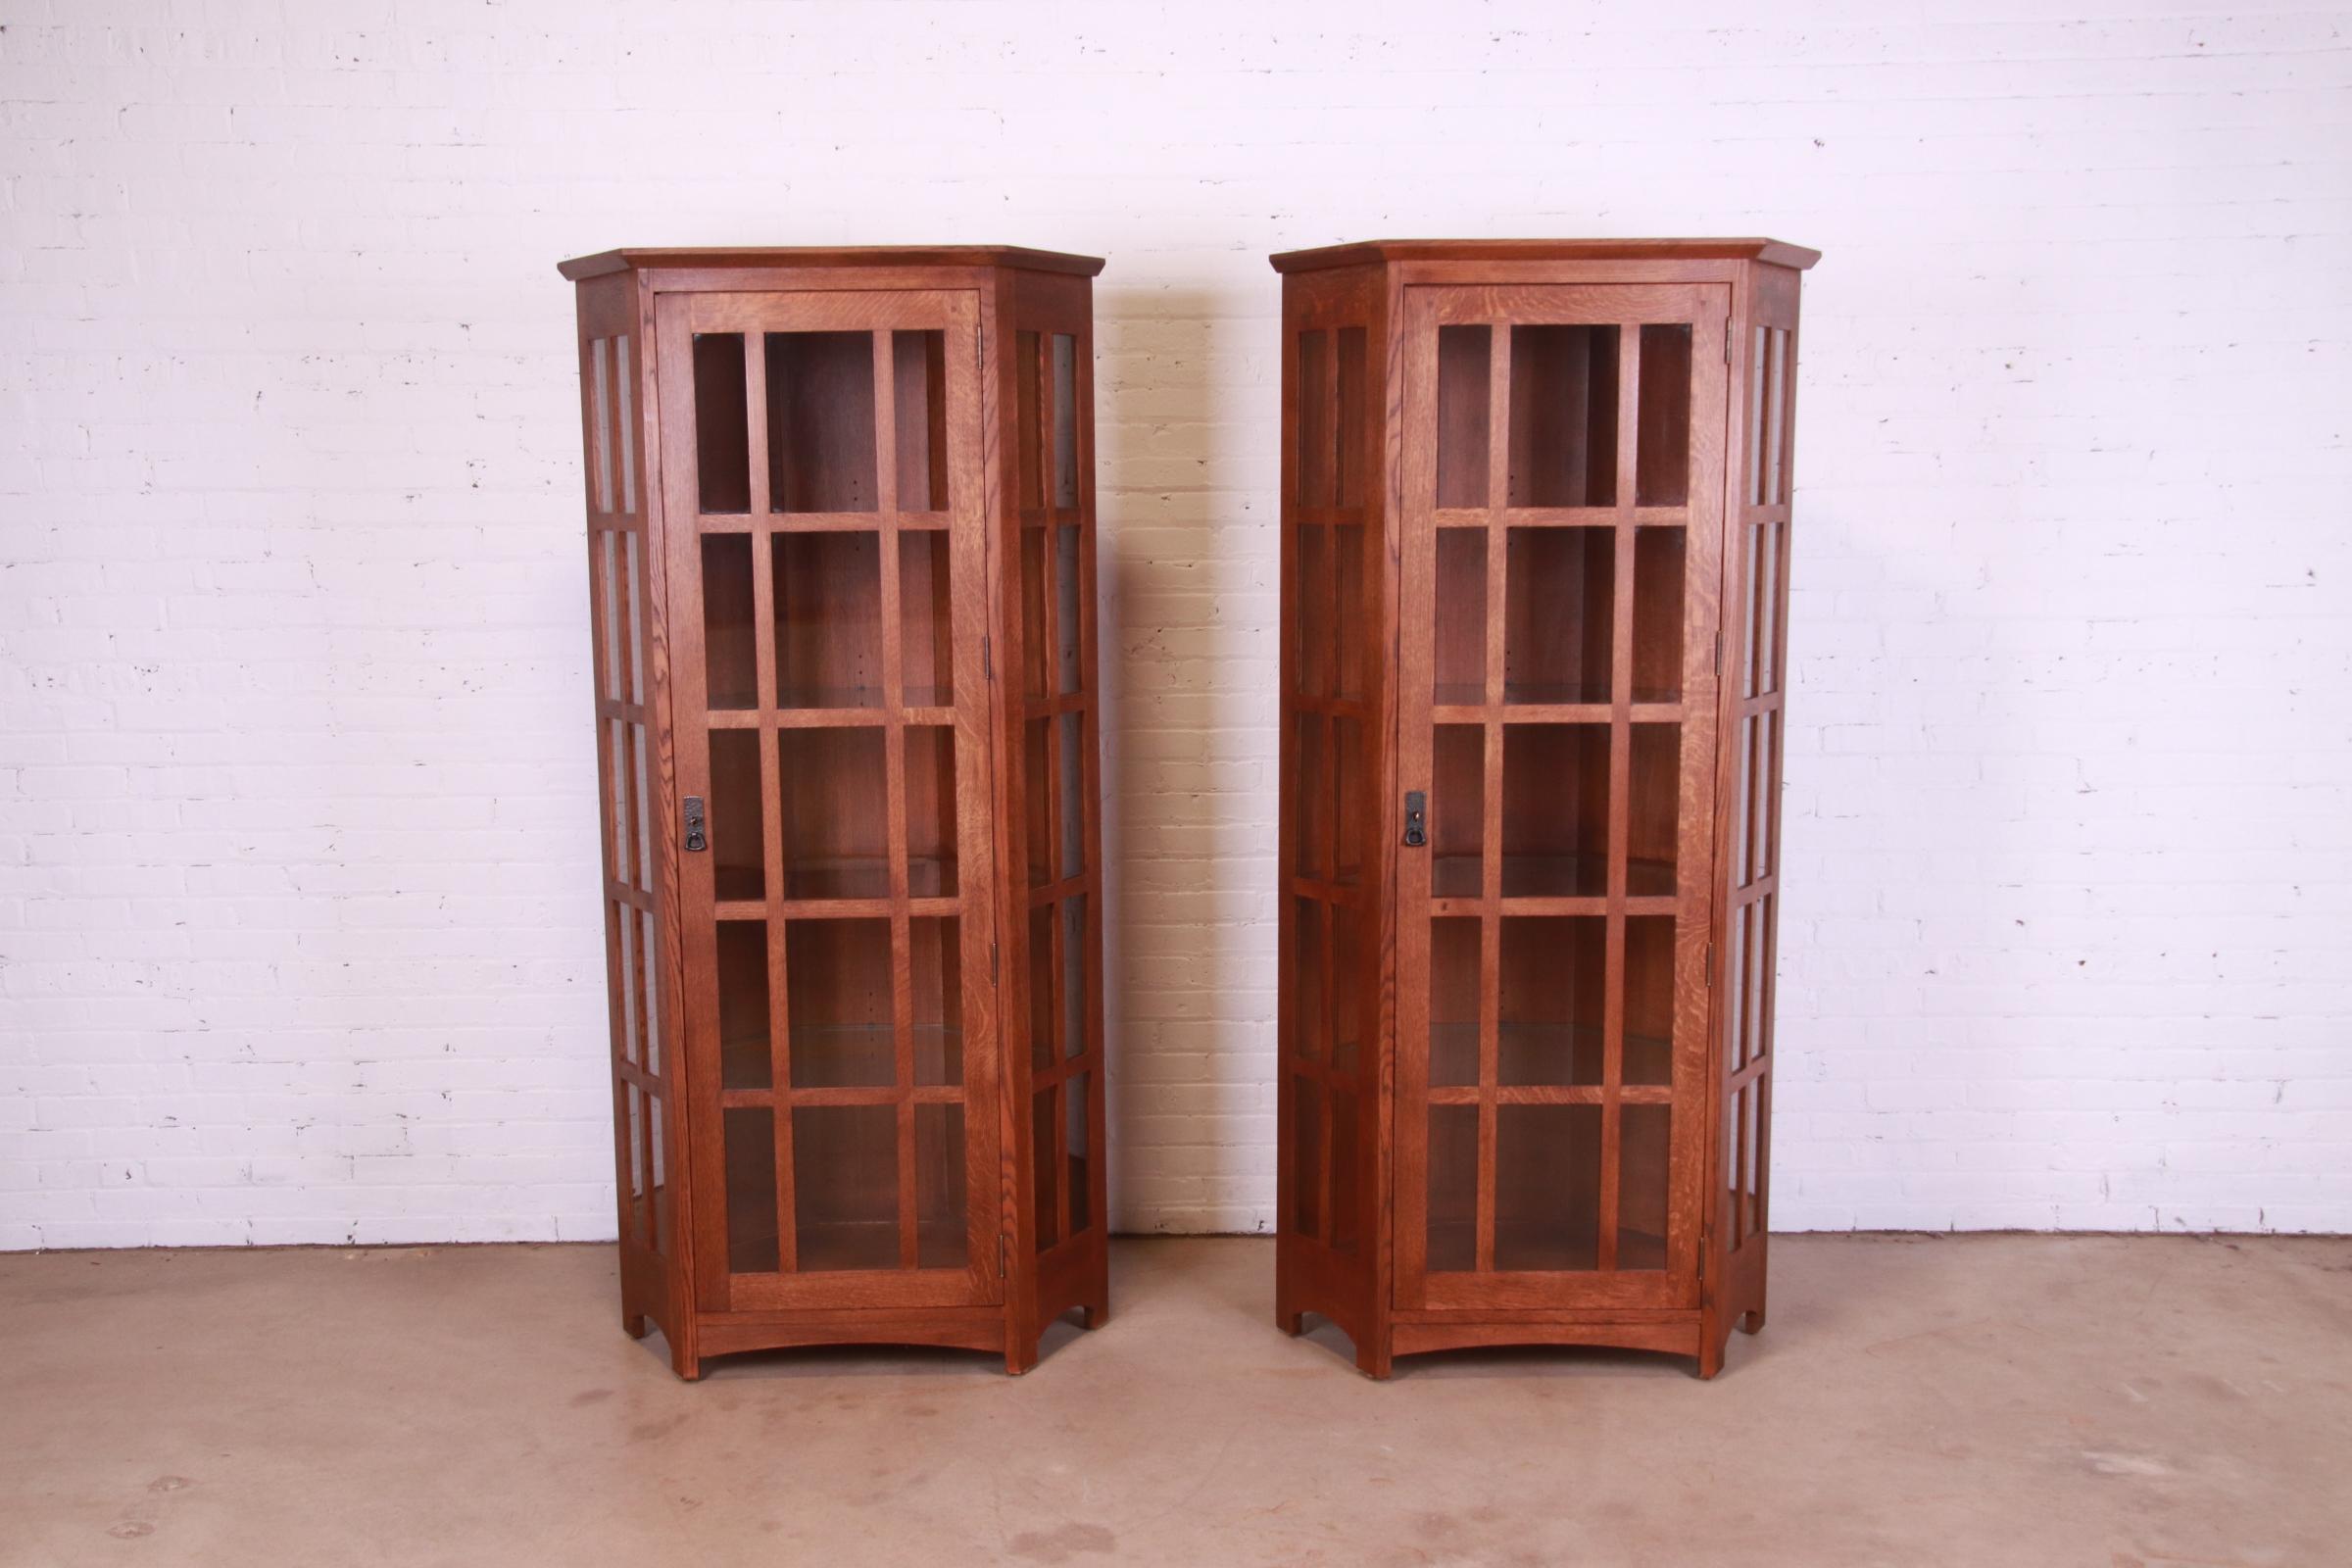 An exceptional pair of Mission Arts & Crafts style lighted corner display cabinets

By Stickley

USA, 2000

Solid oak, with mullioned glass doors and glass shelves.

Measures: 38.75